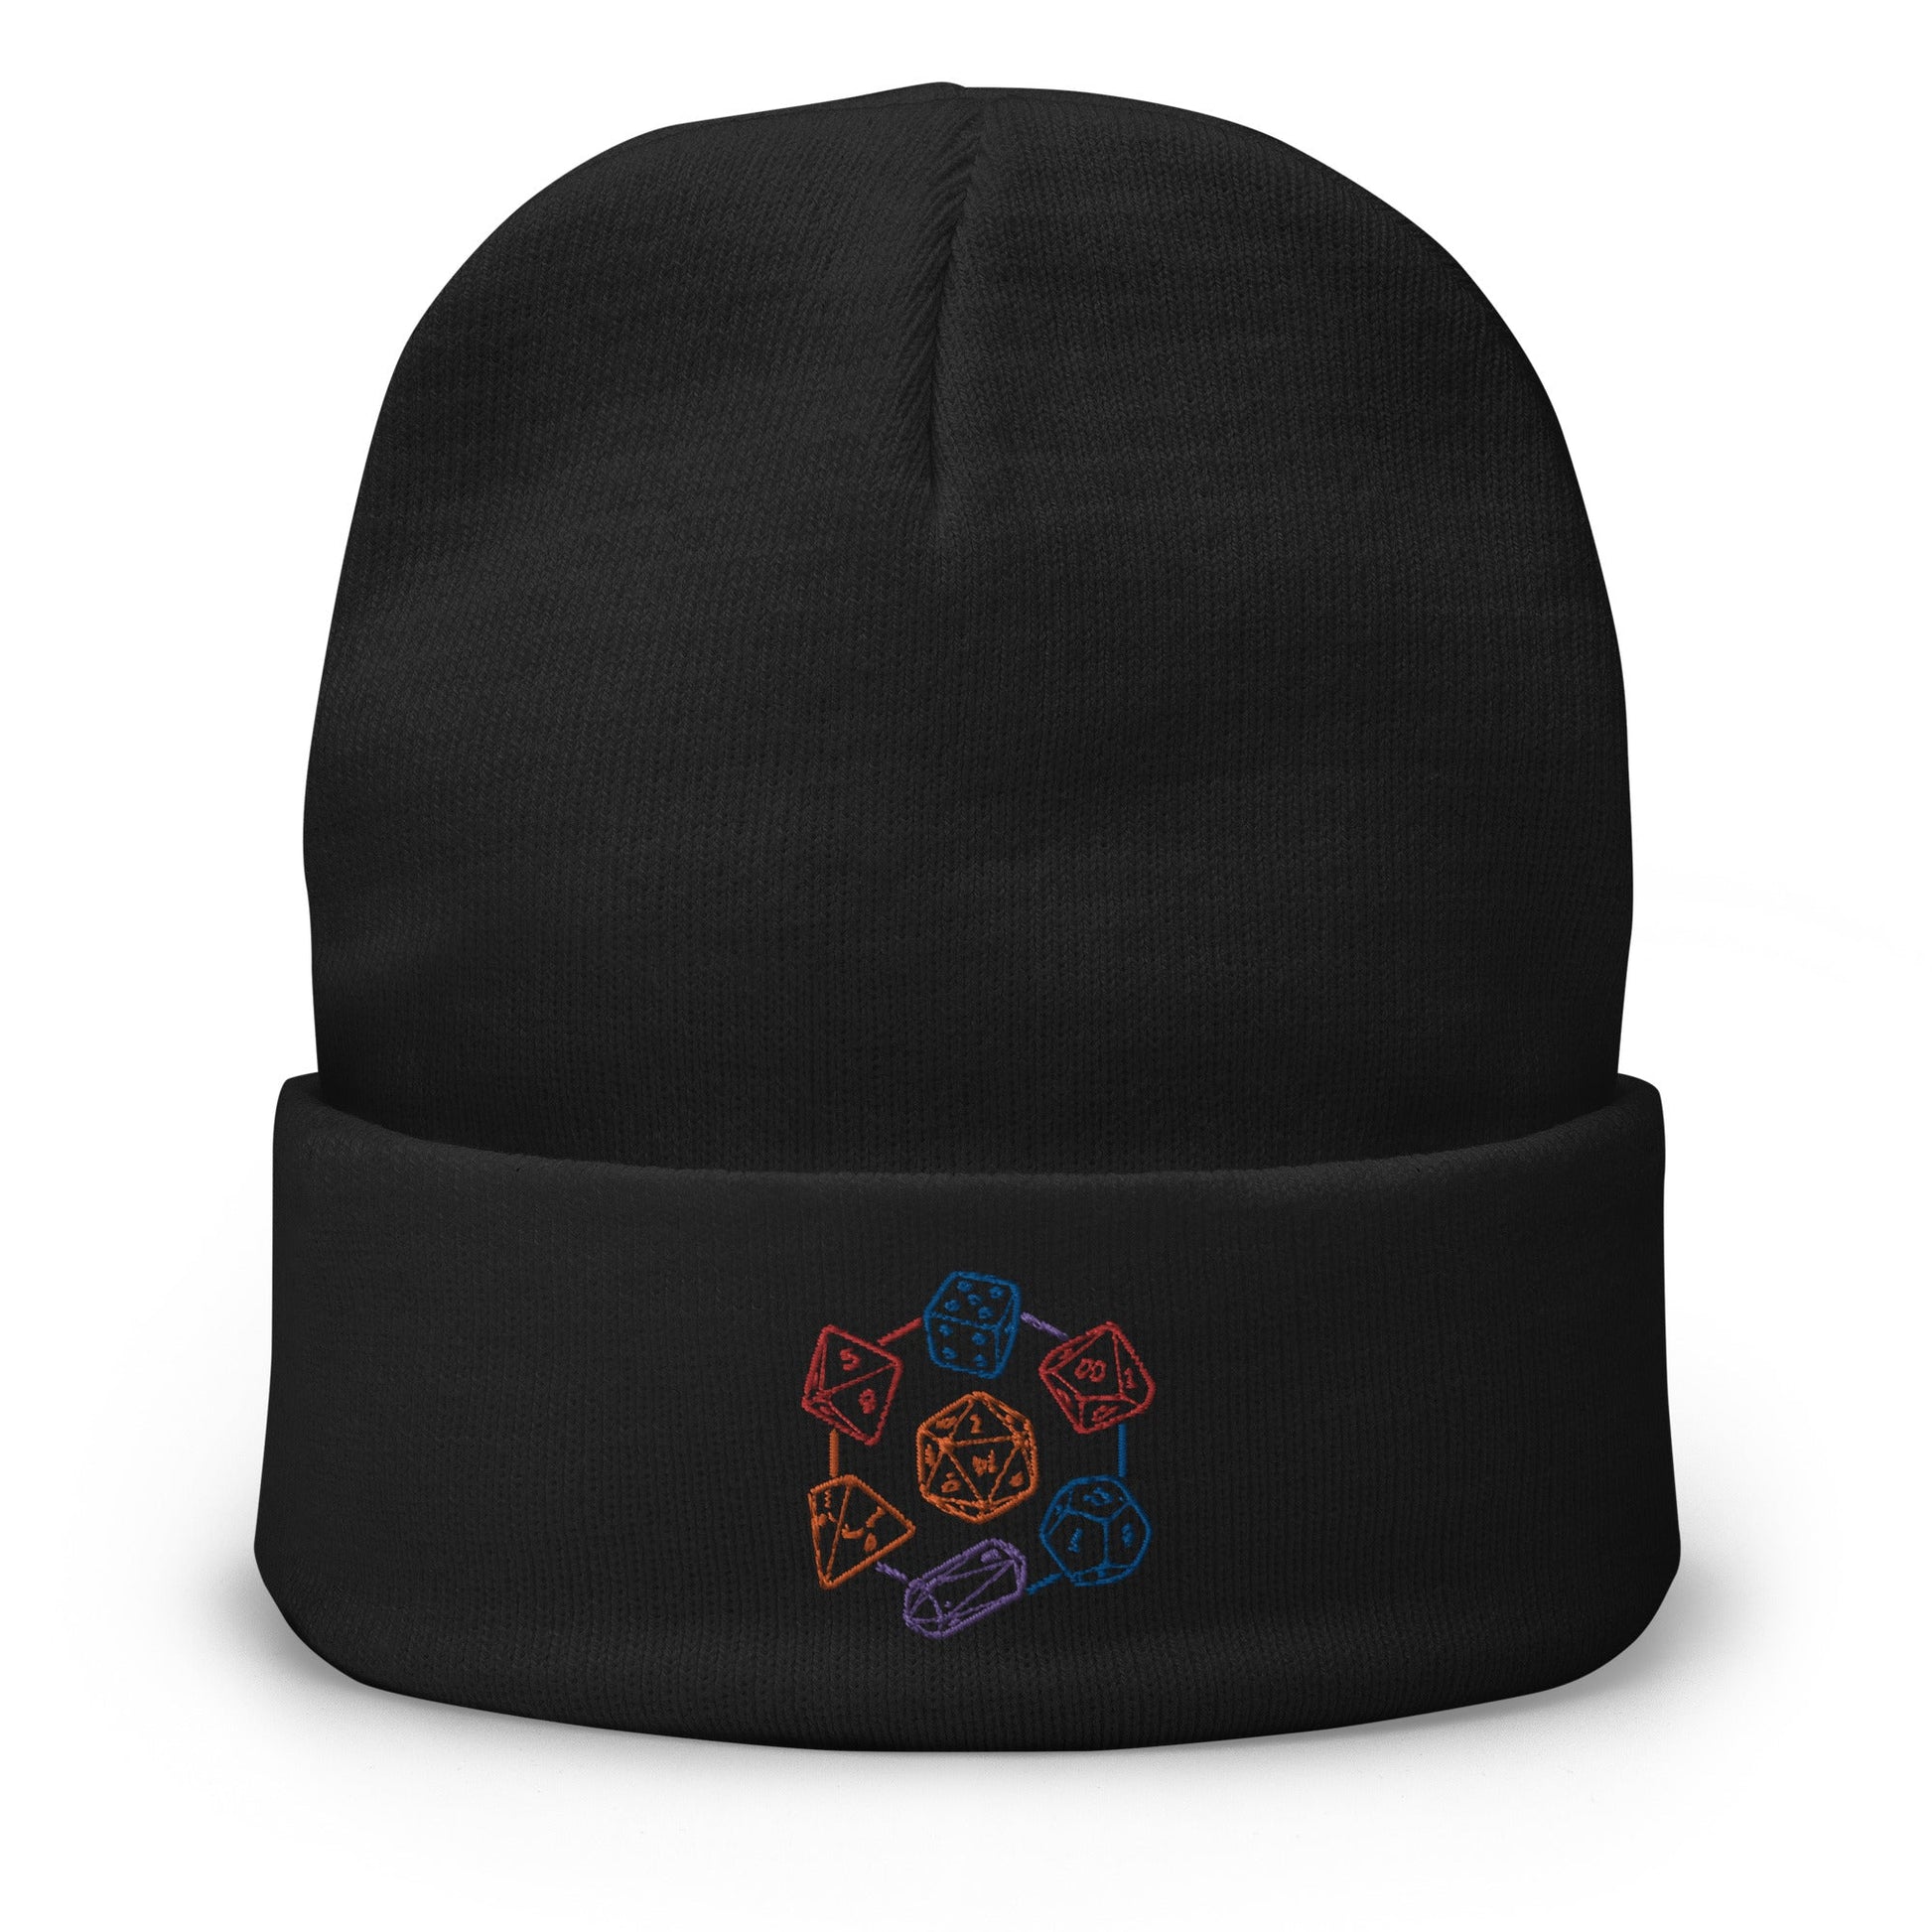 Polyhedral DnD Dice Embroidered Beanie